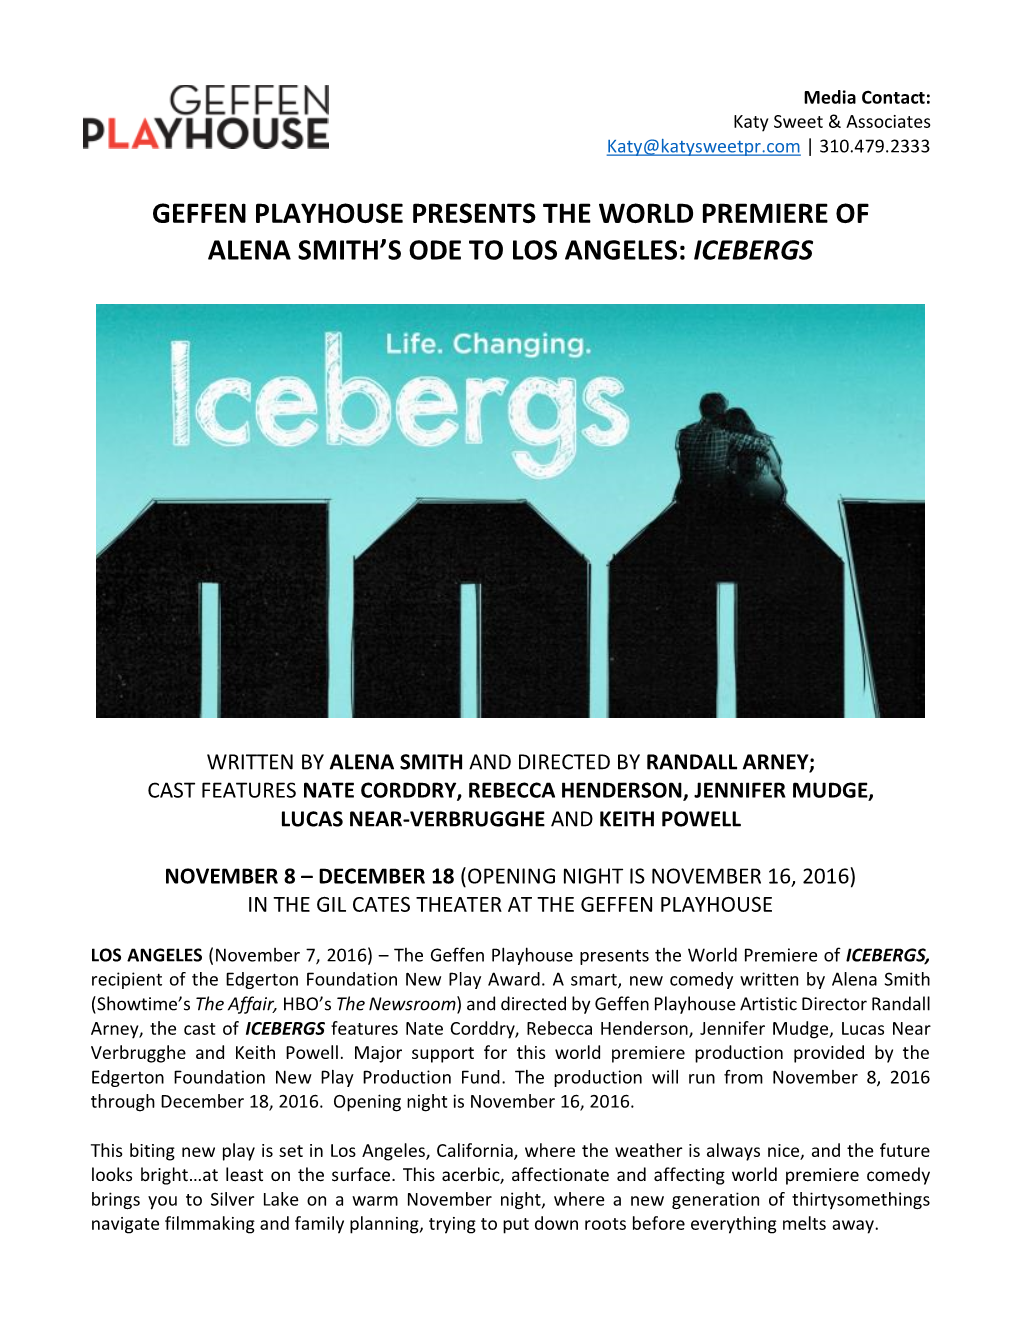 Geffen Playhouse Presents the World Premiere of Alena Smith’S Ode to Los Angeles: Icebergs